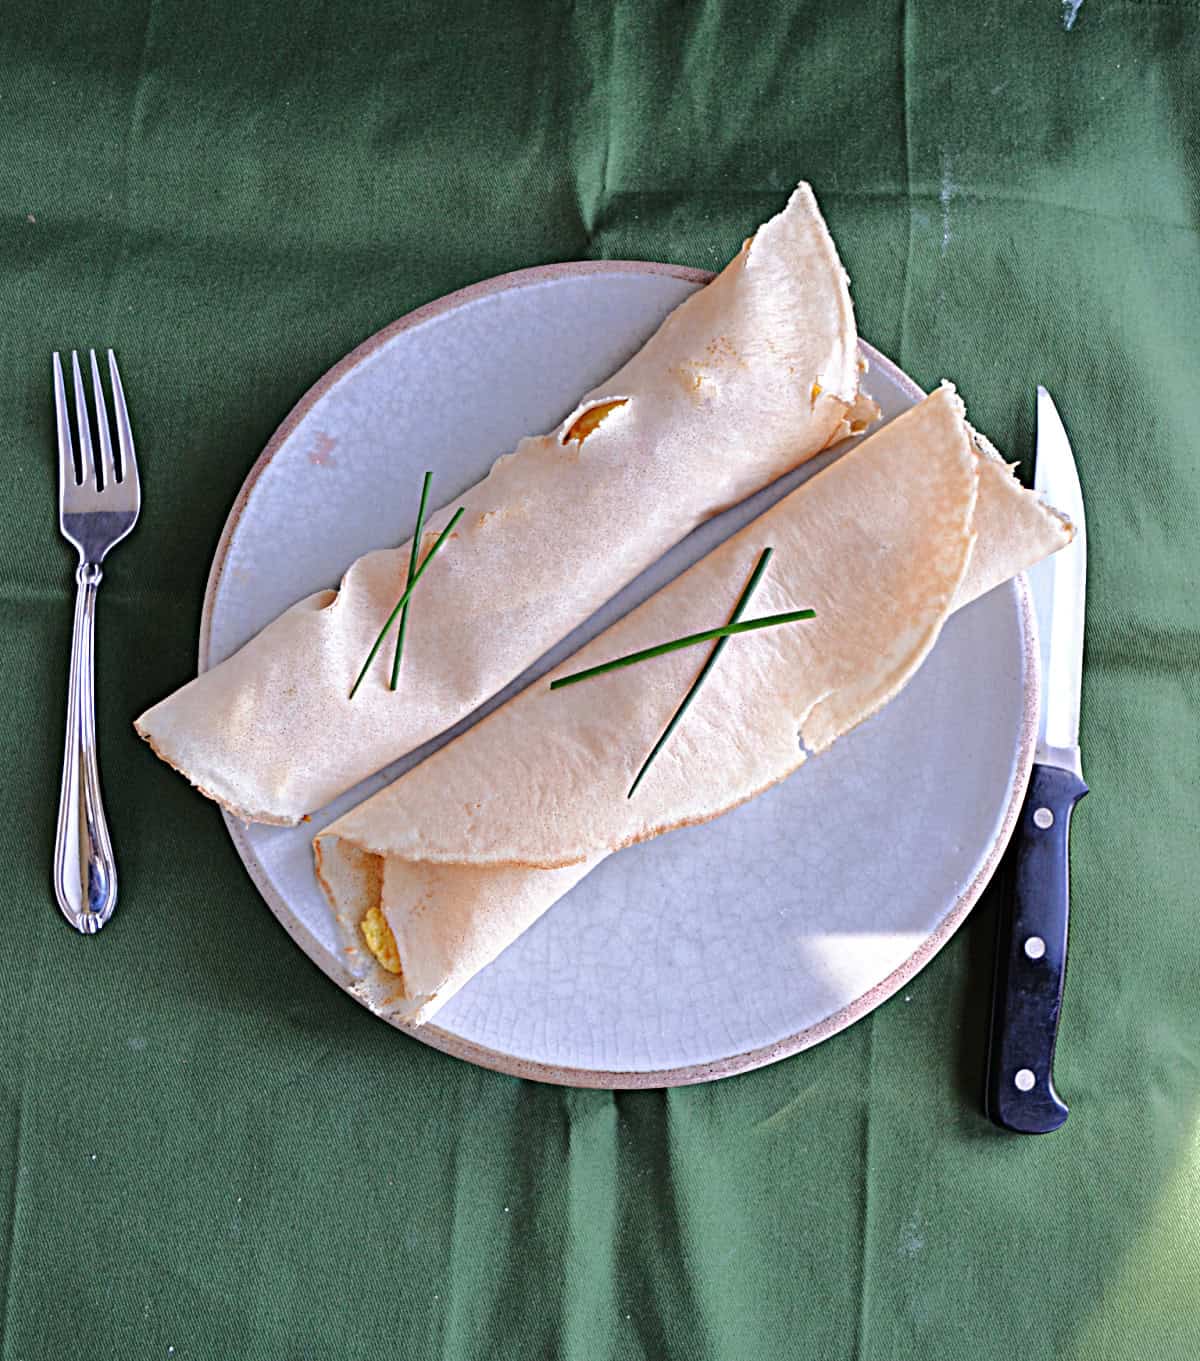 A plate with two crepes, a fork, and a knife.